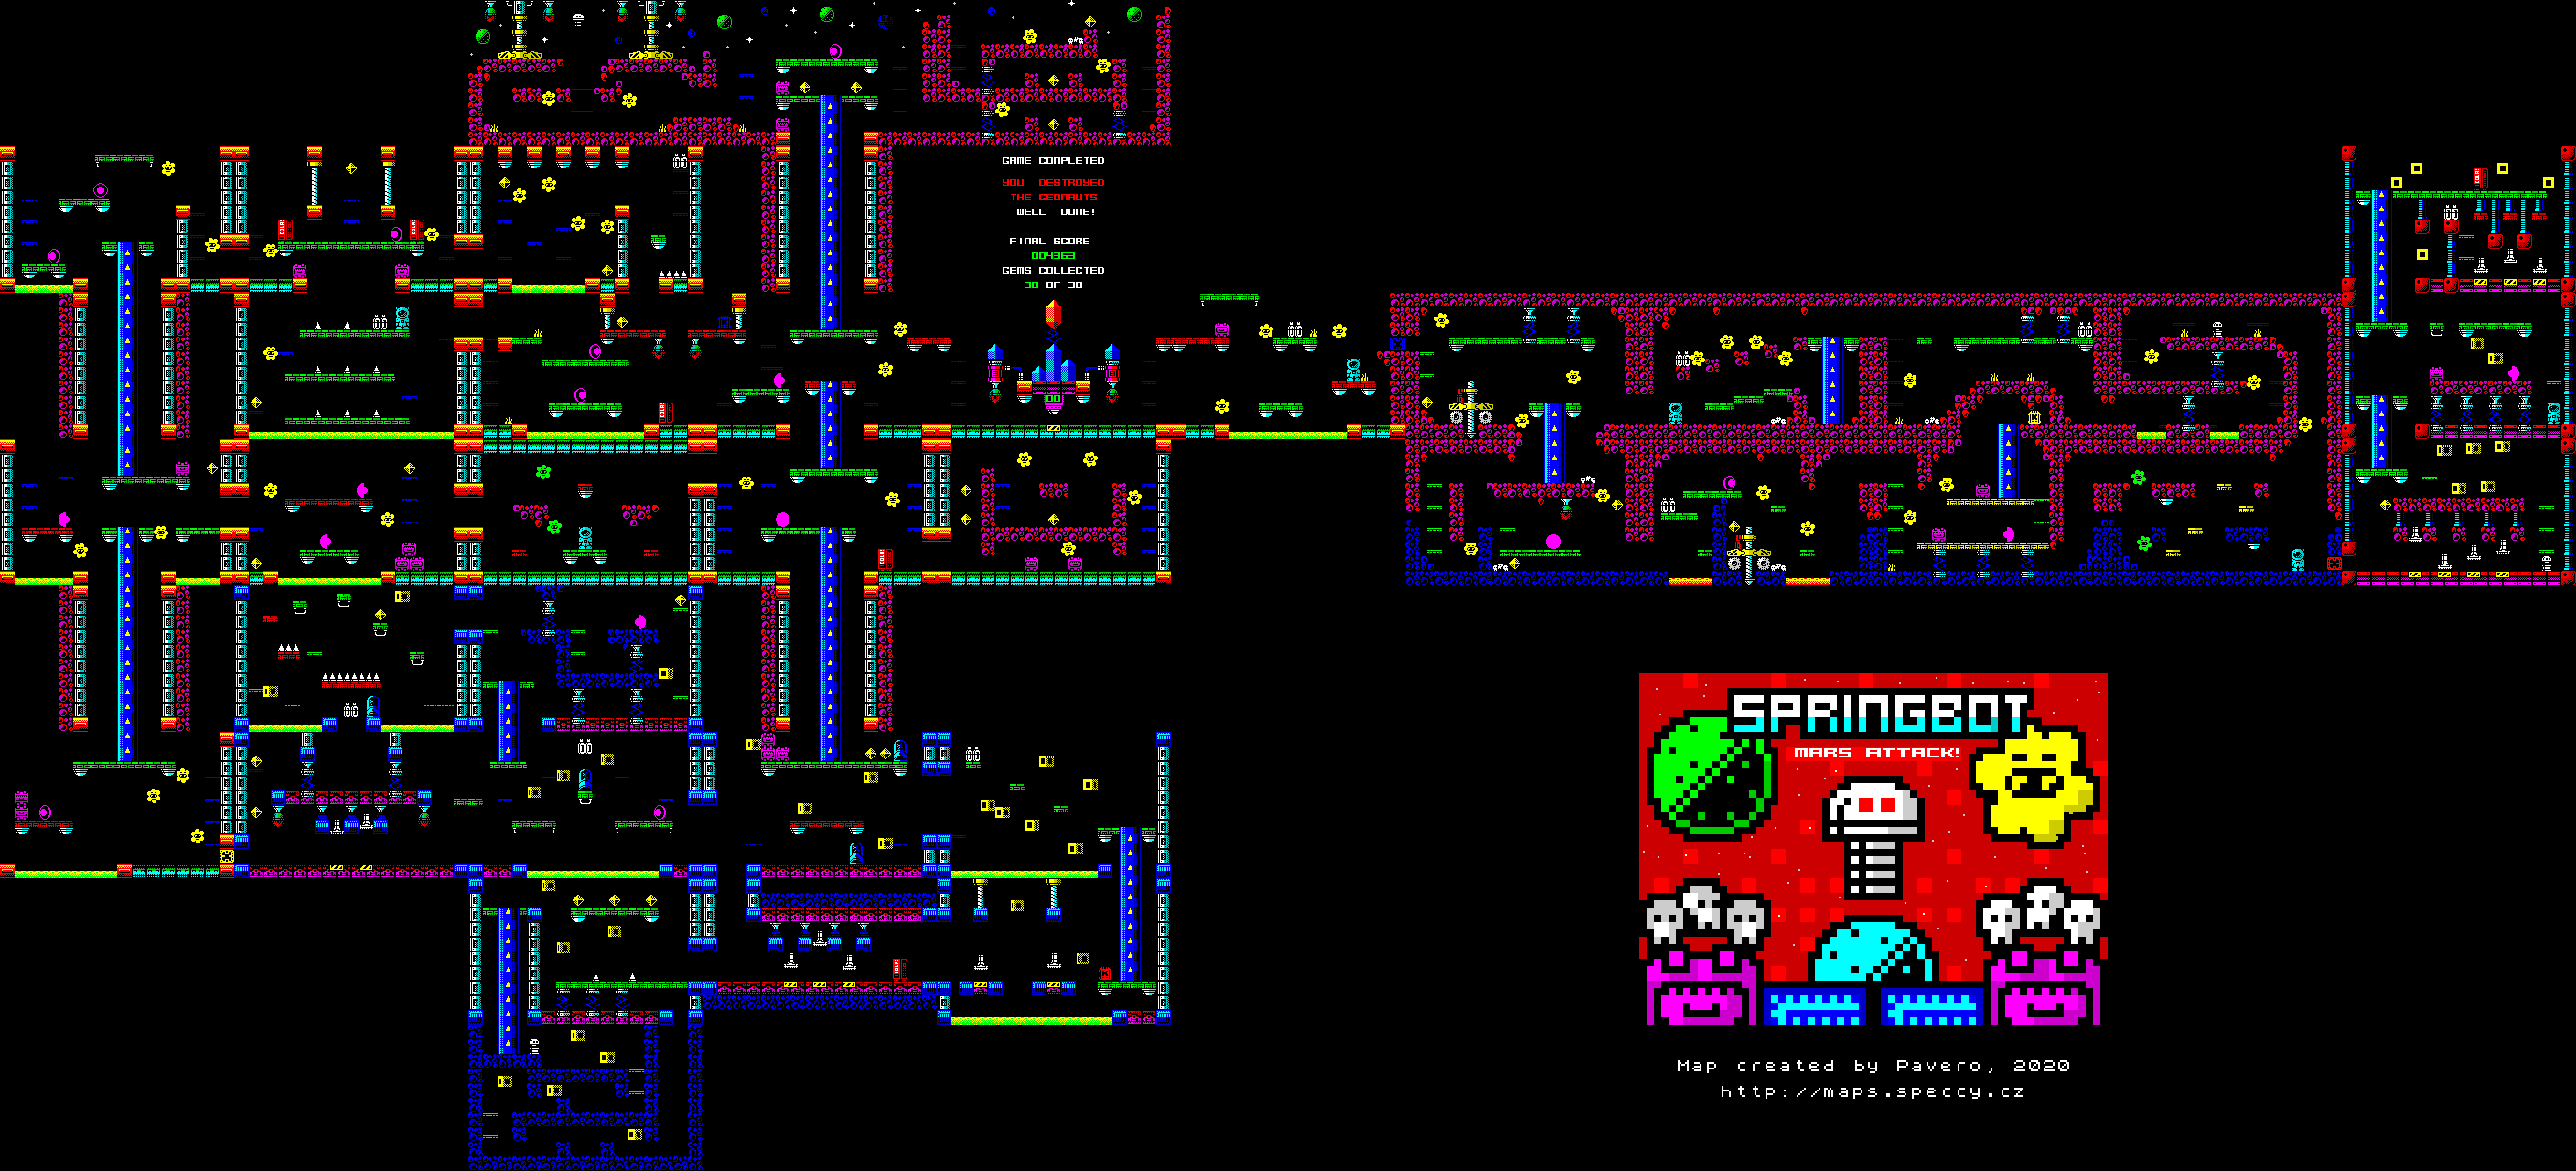 Springbot - Mars Attack! - The Map